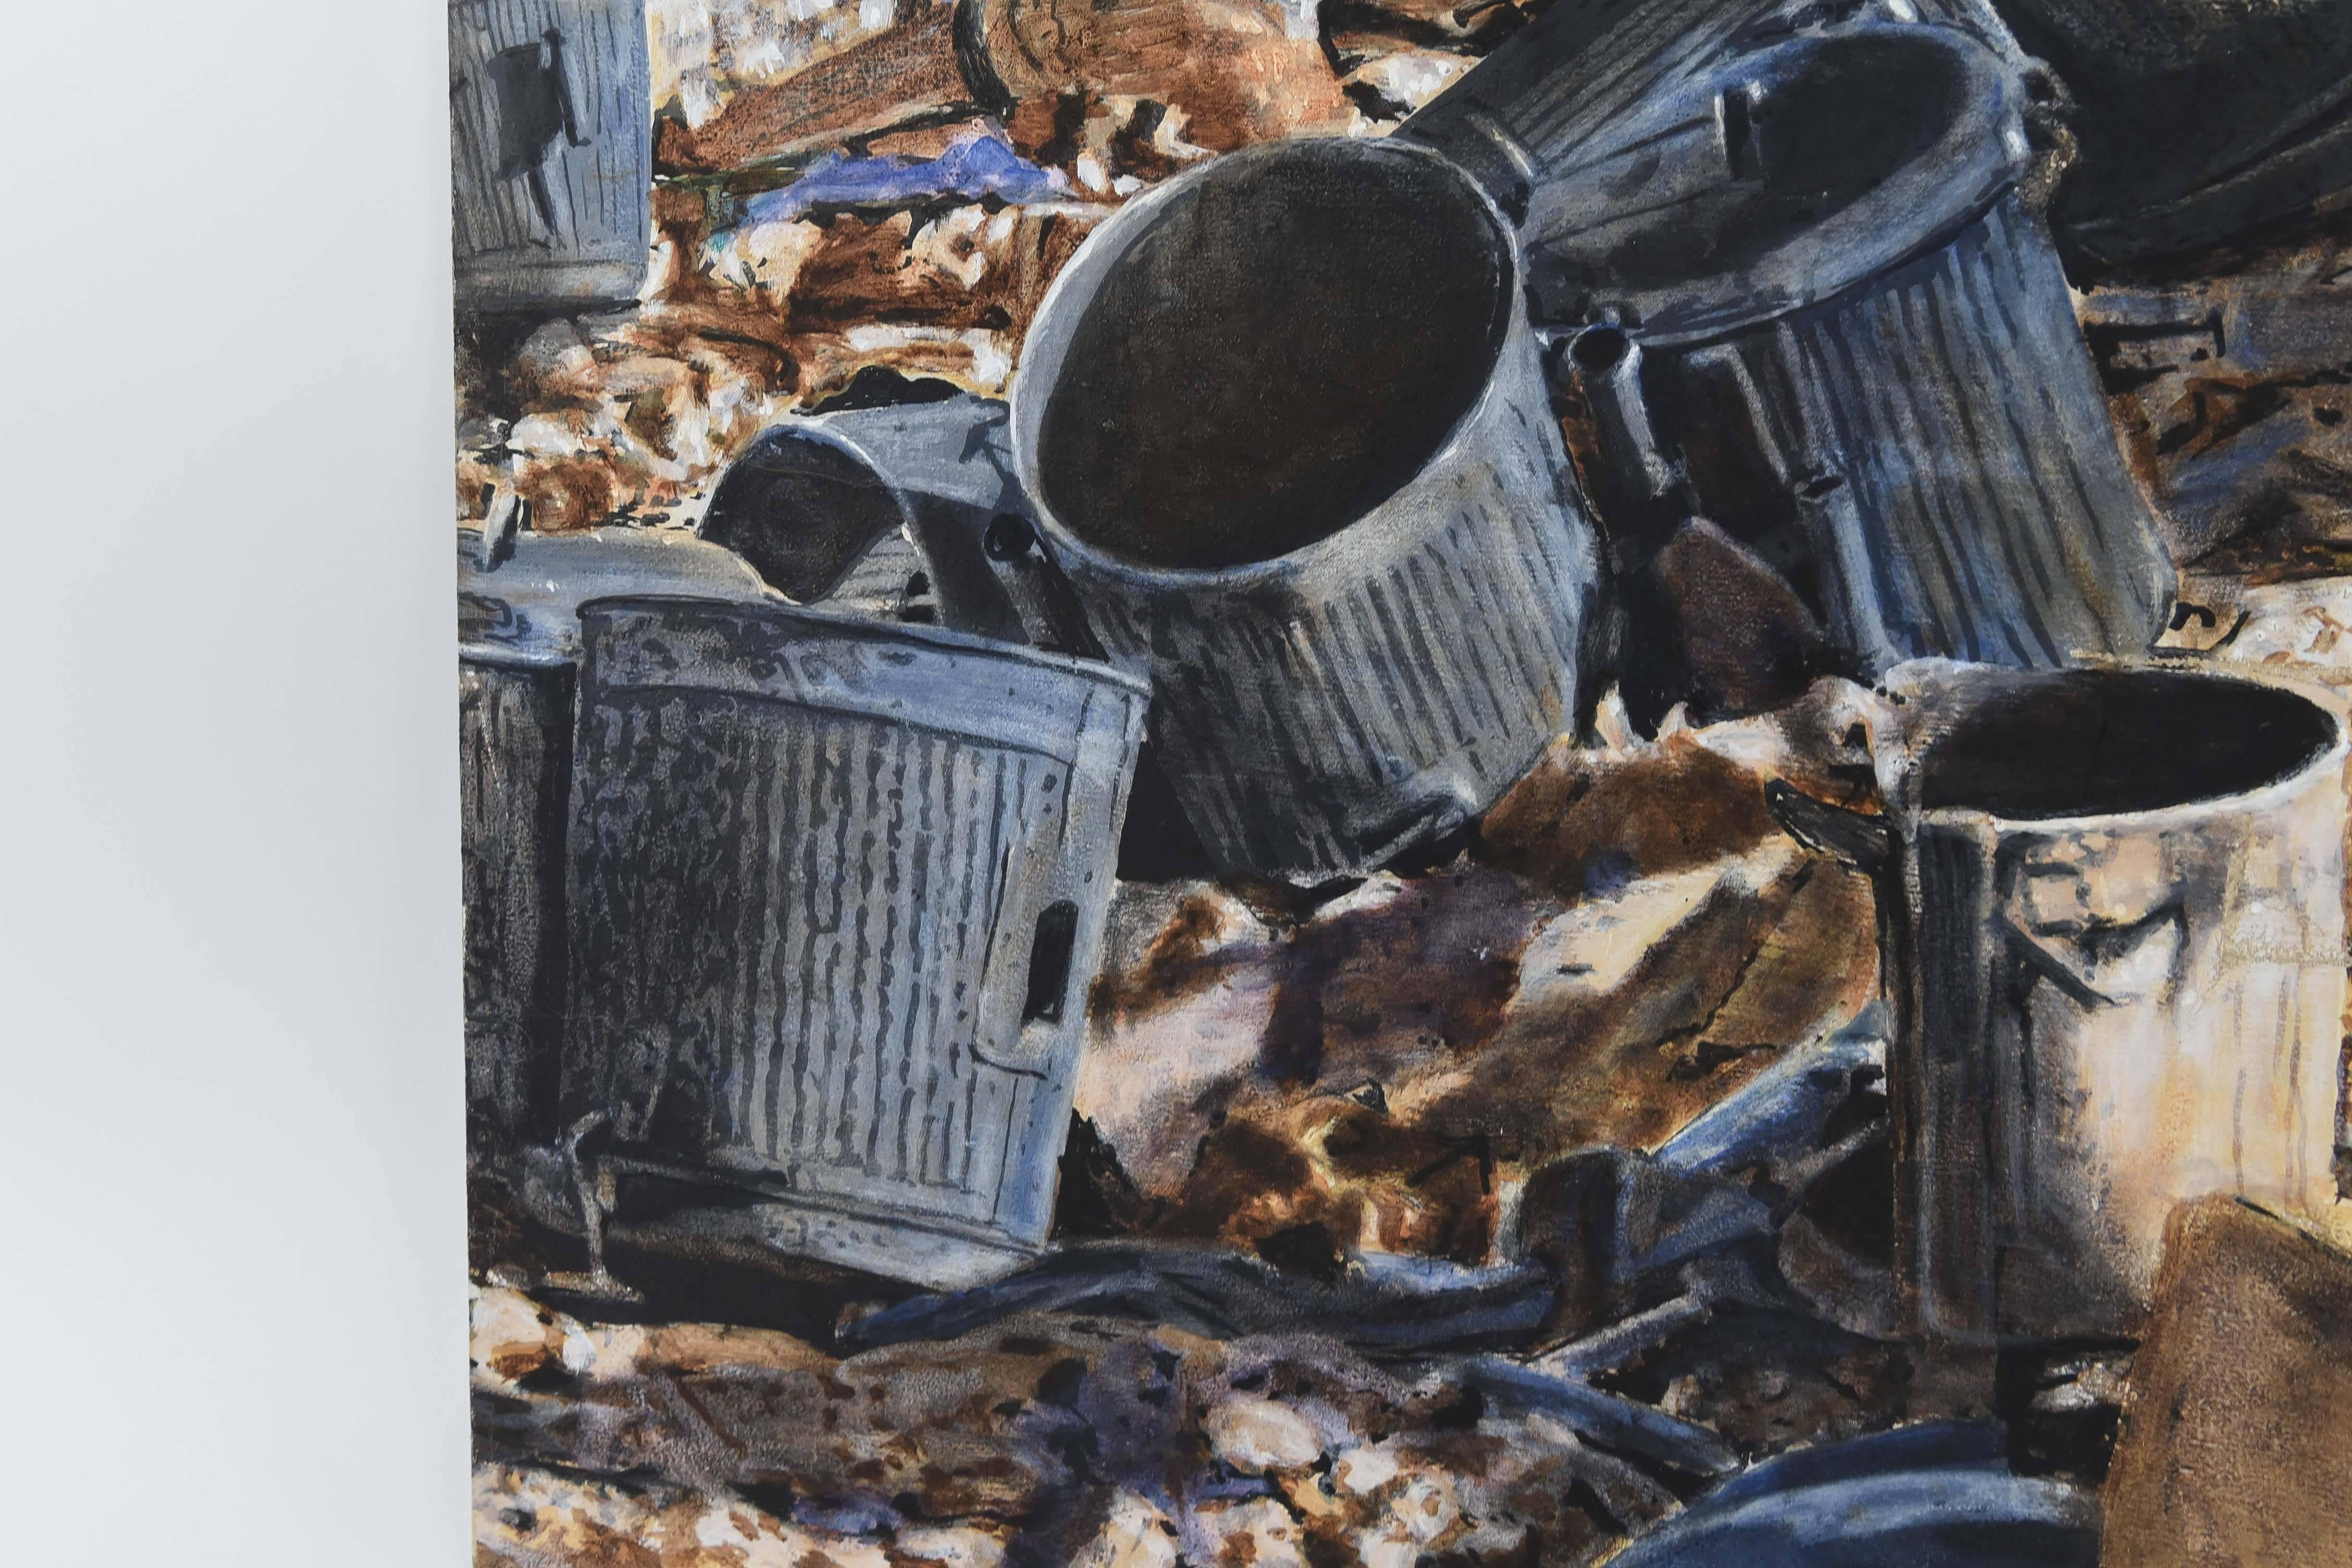 Paint Oil on Canvas of a Landfill in Israel